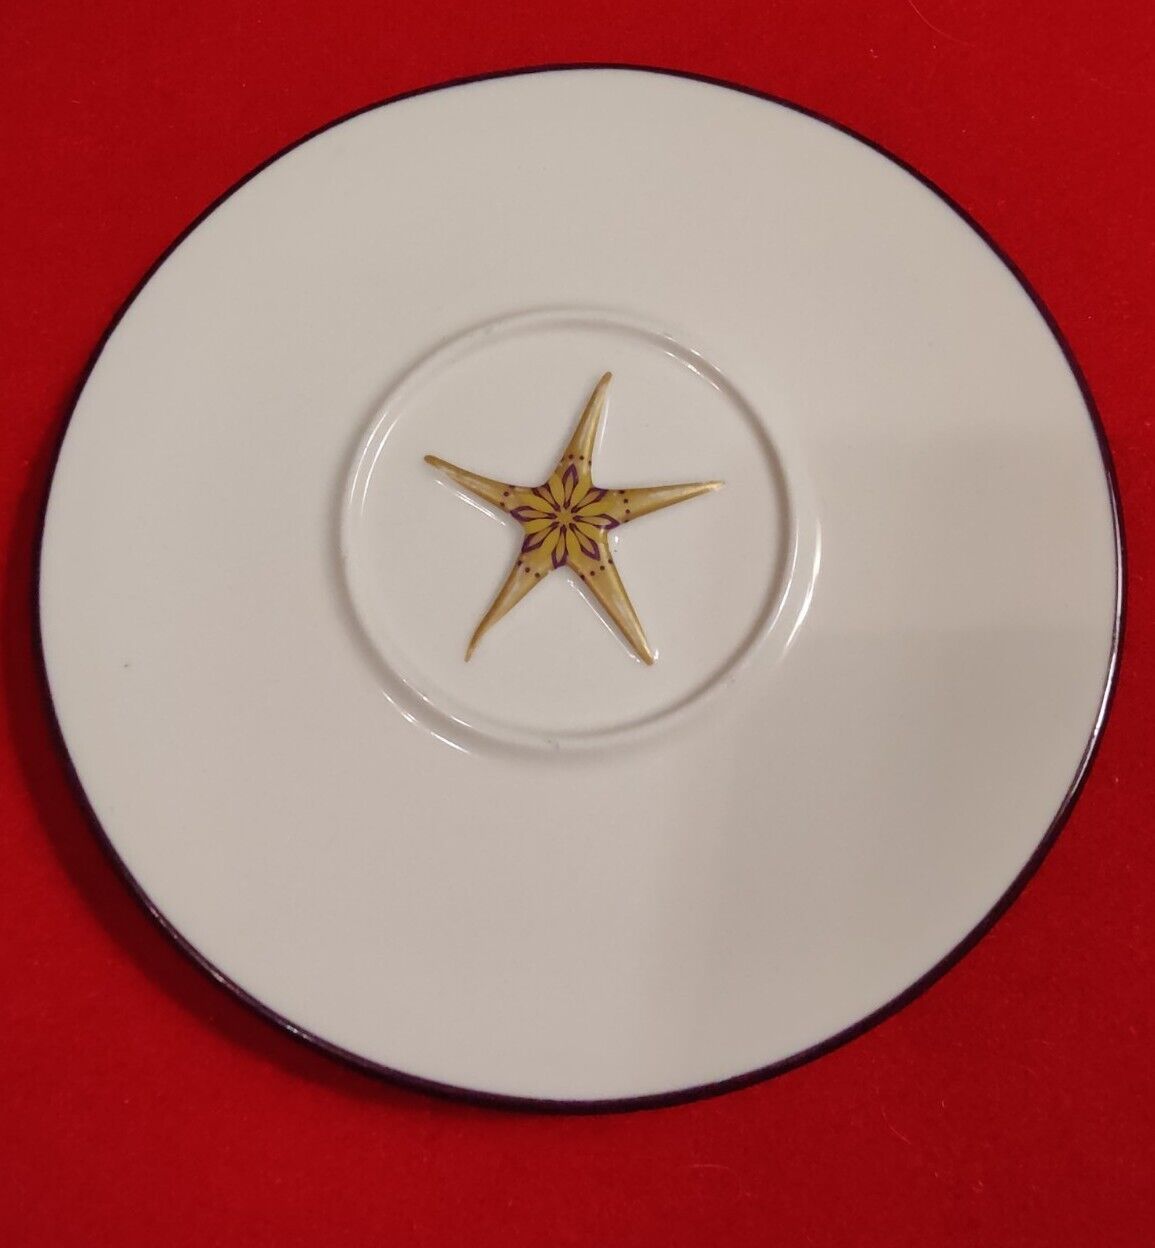 2006 STARBUCKS Holiday Small PLATE Saucer With Gold Star, 6.5